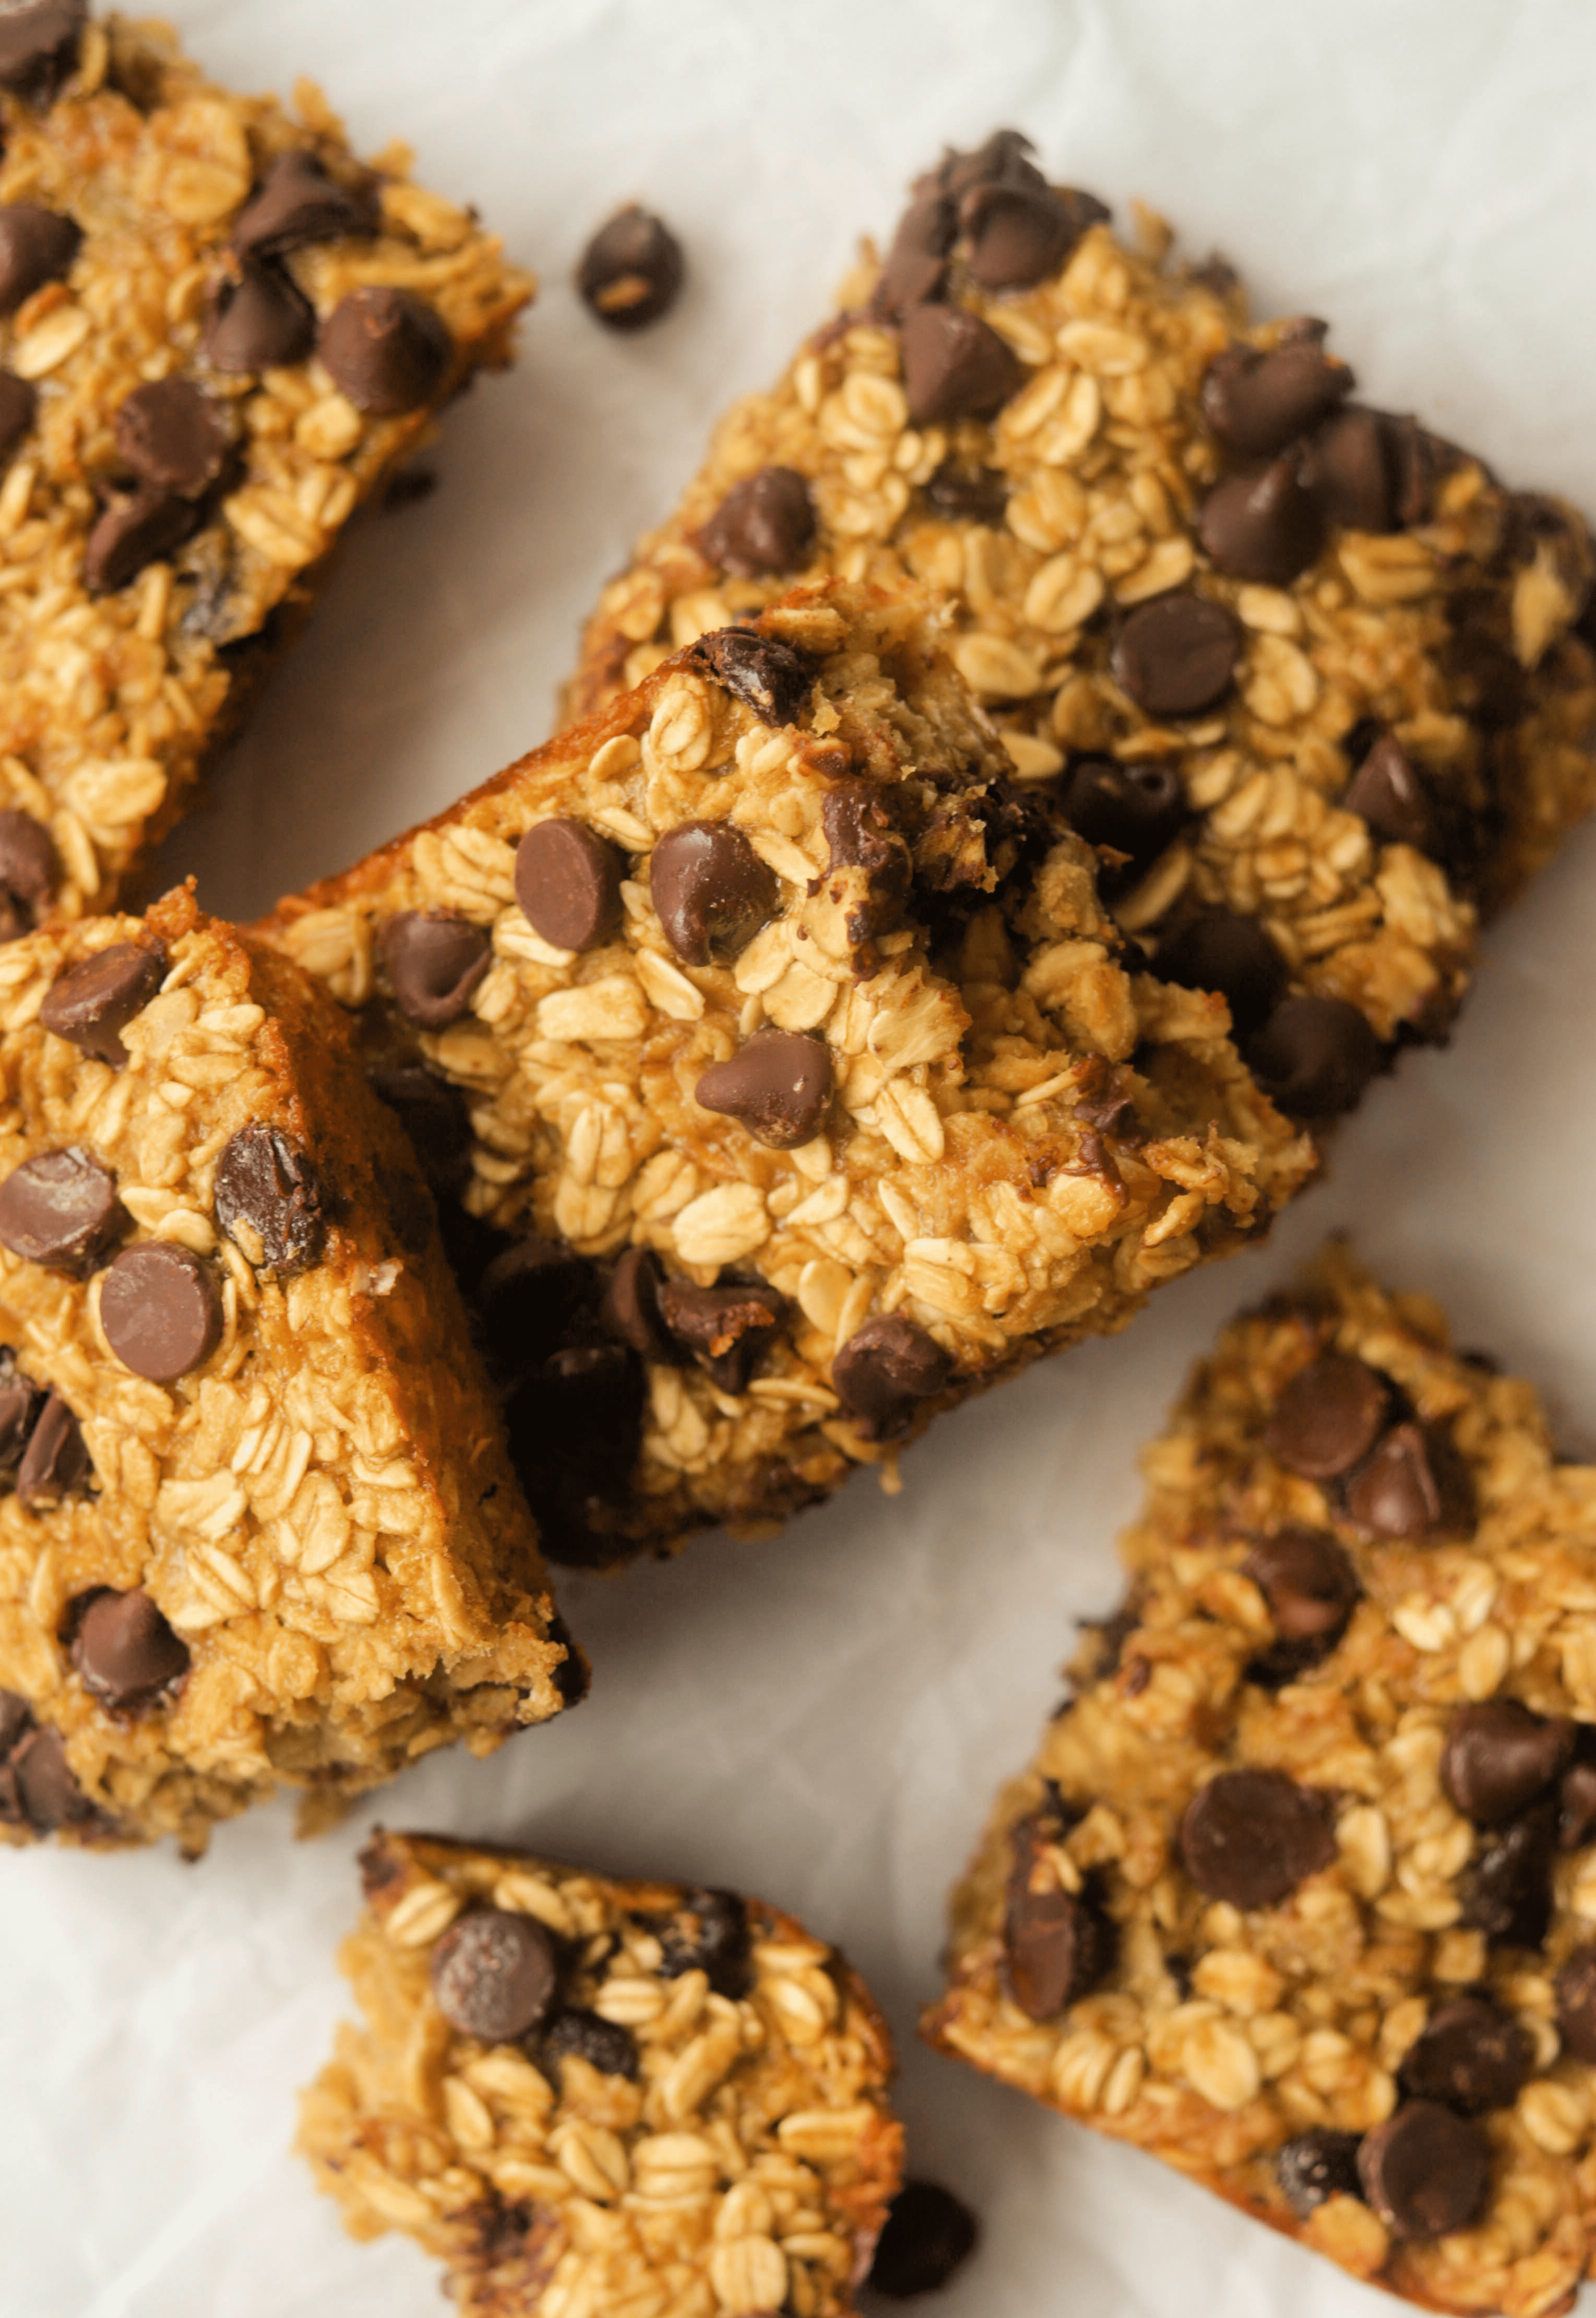 An overhead shot of squares of chocolate chip baked oats.